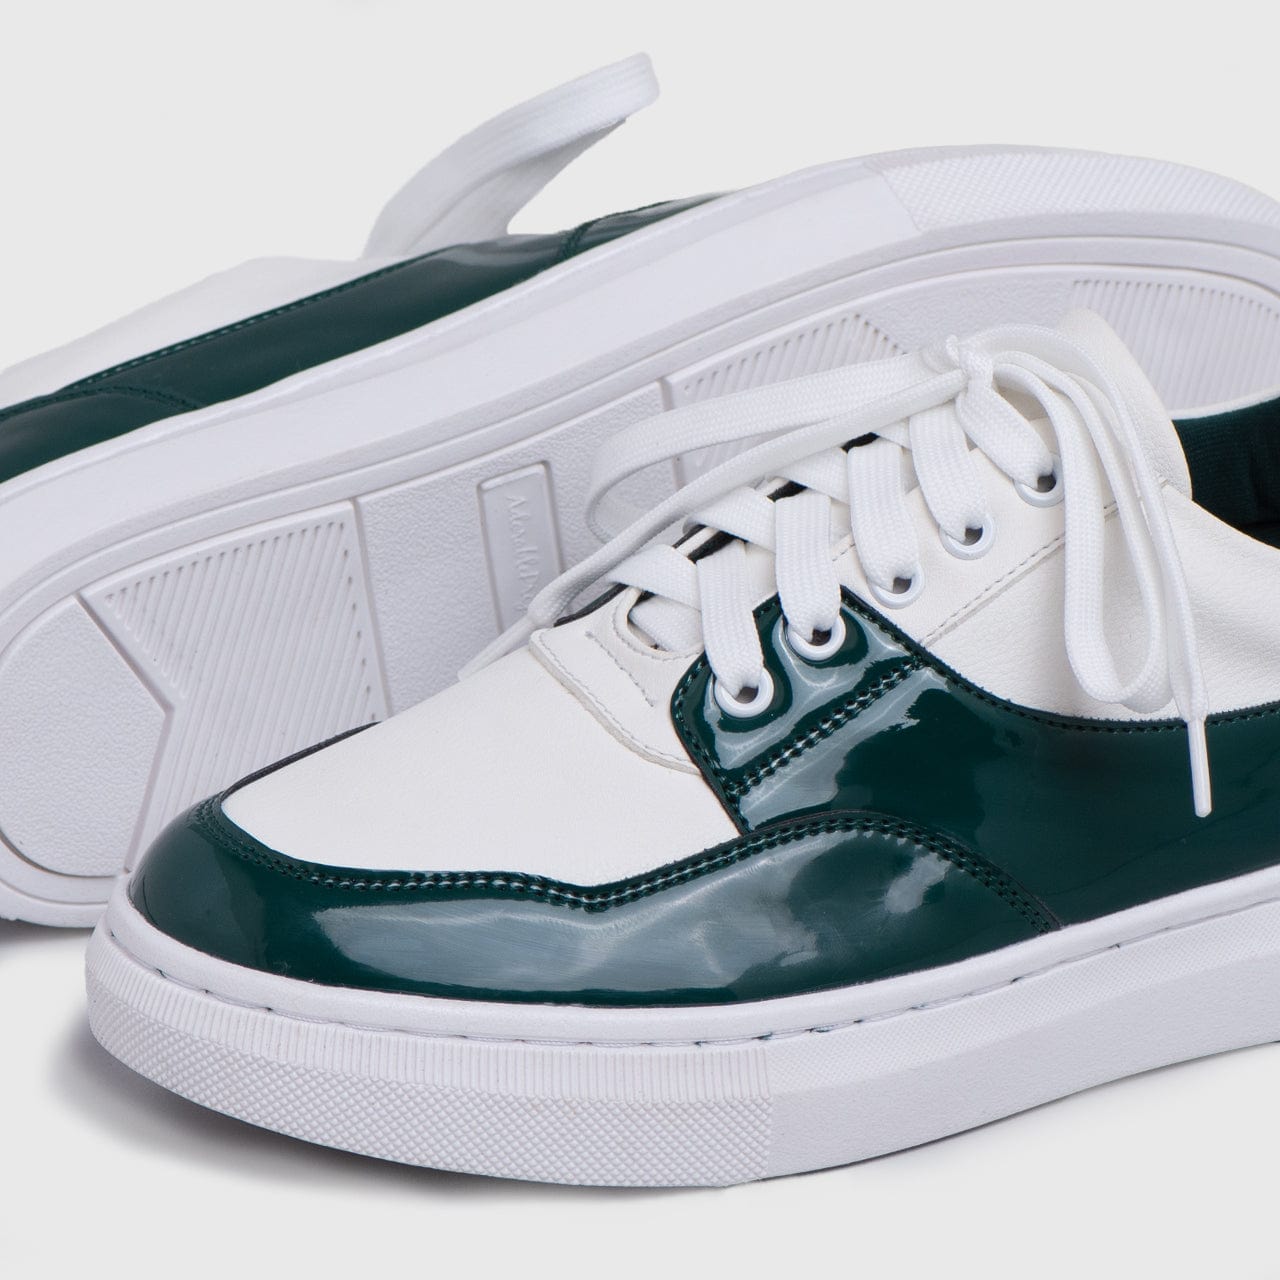 Adorable Projects Official Creatsy Sneakers White Green